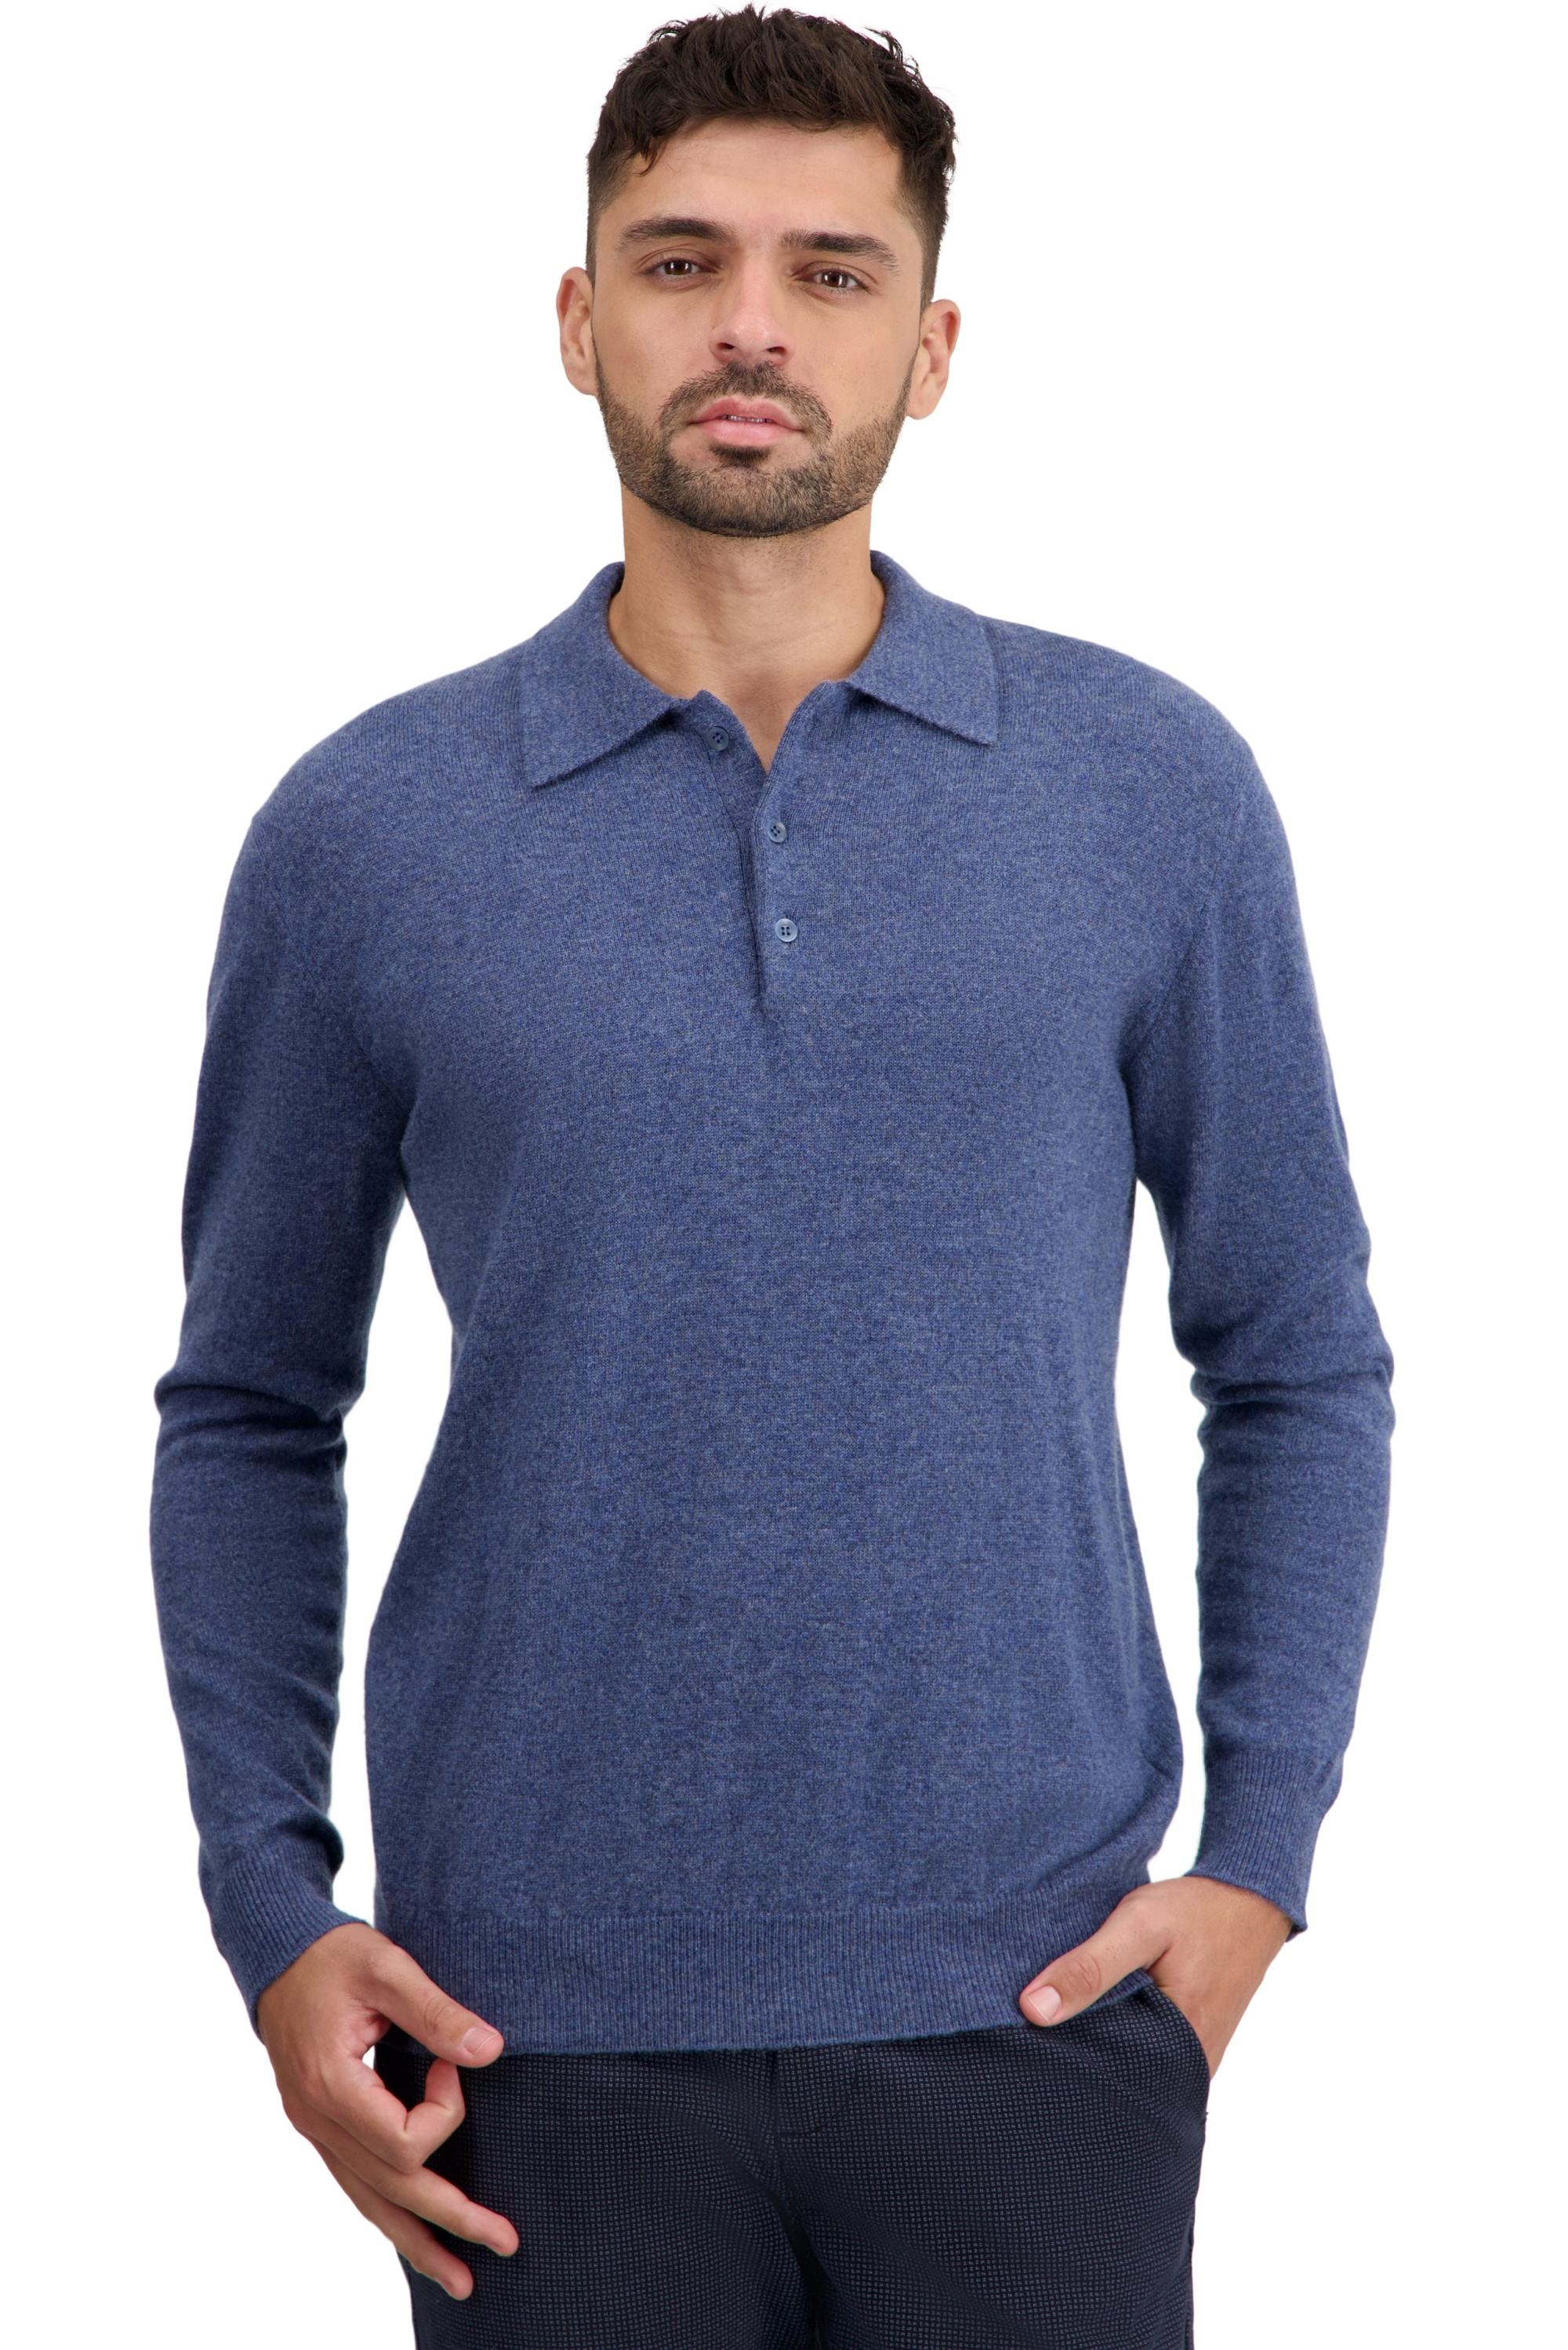 Cachemire petits prix homme tarn first nordic blue xl